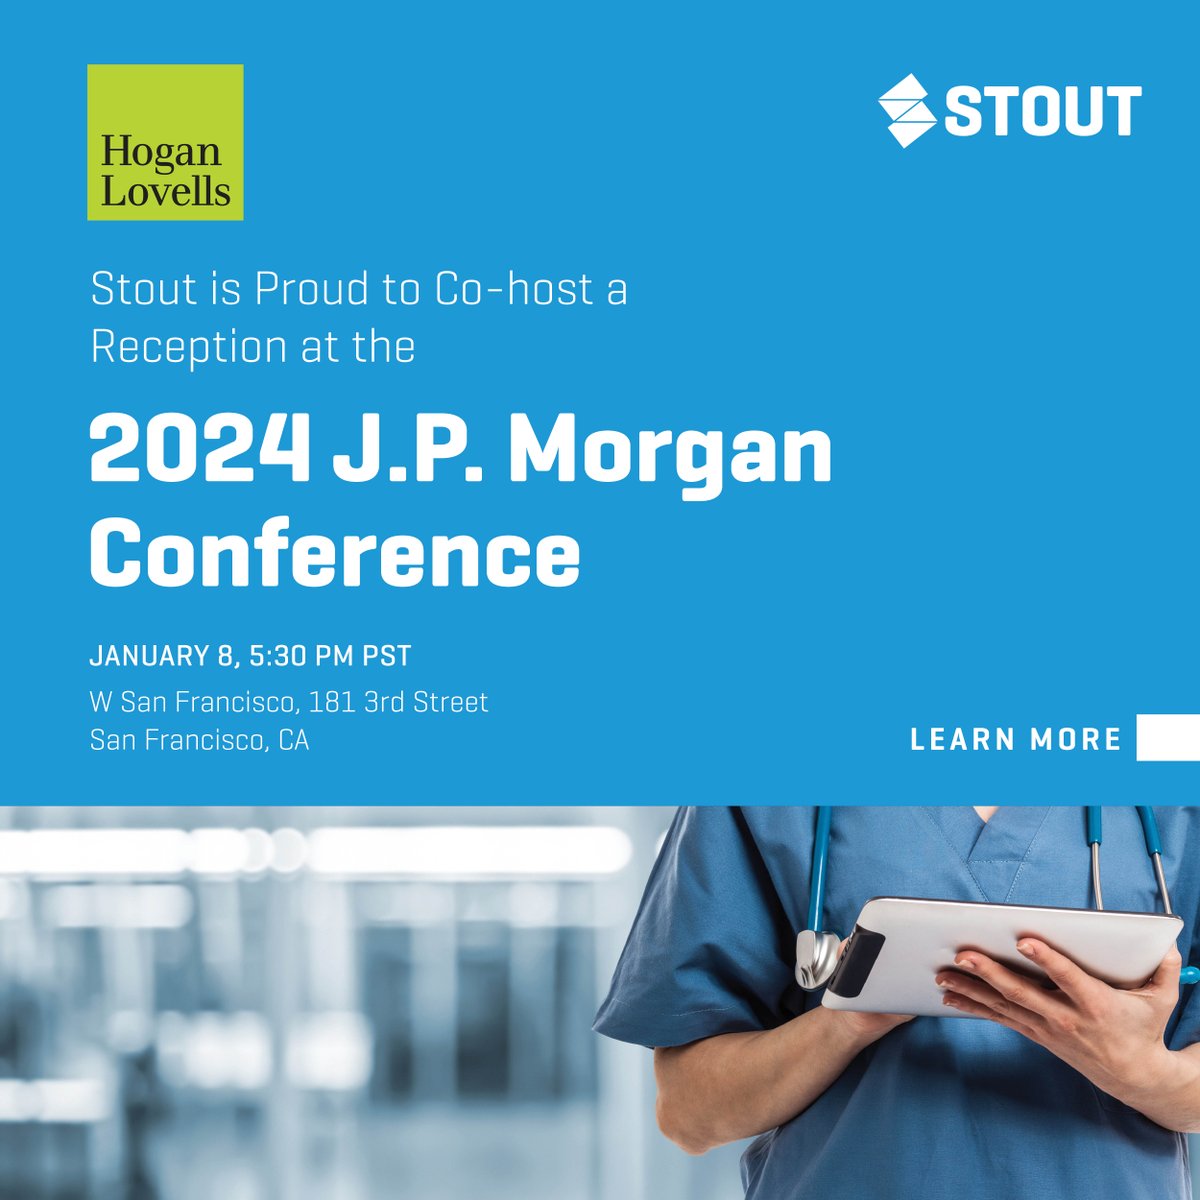 Join Stout for an exclusive networking reception during the J.P. Morgan Conference with Hogan Lovells and Cancer Focus Fund. RSVP here to join: bit.ly/3NEt4fi